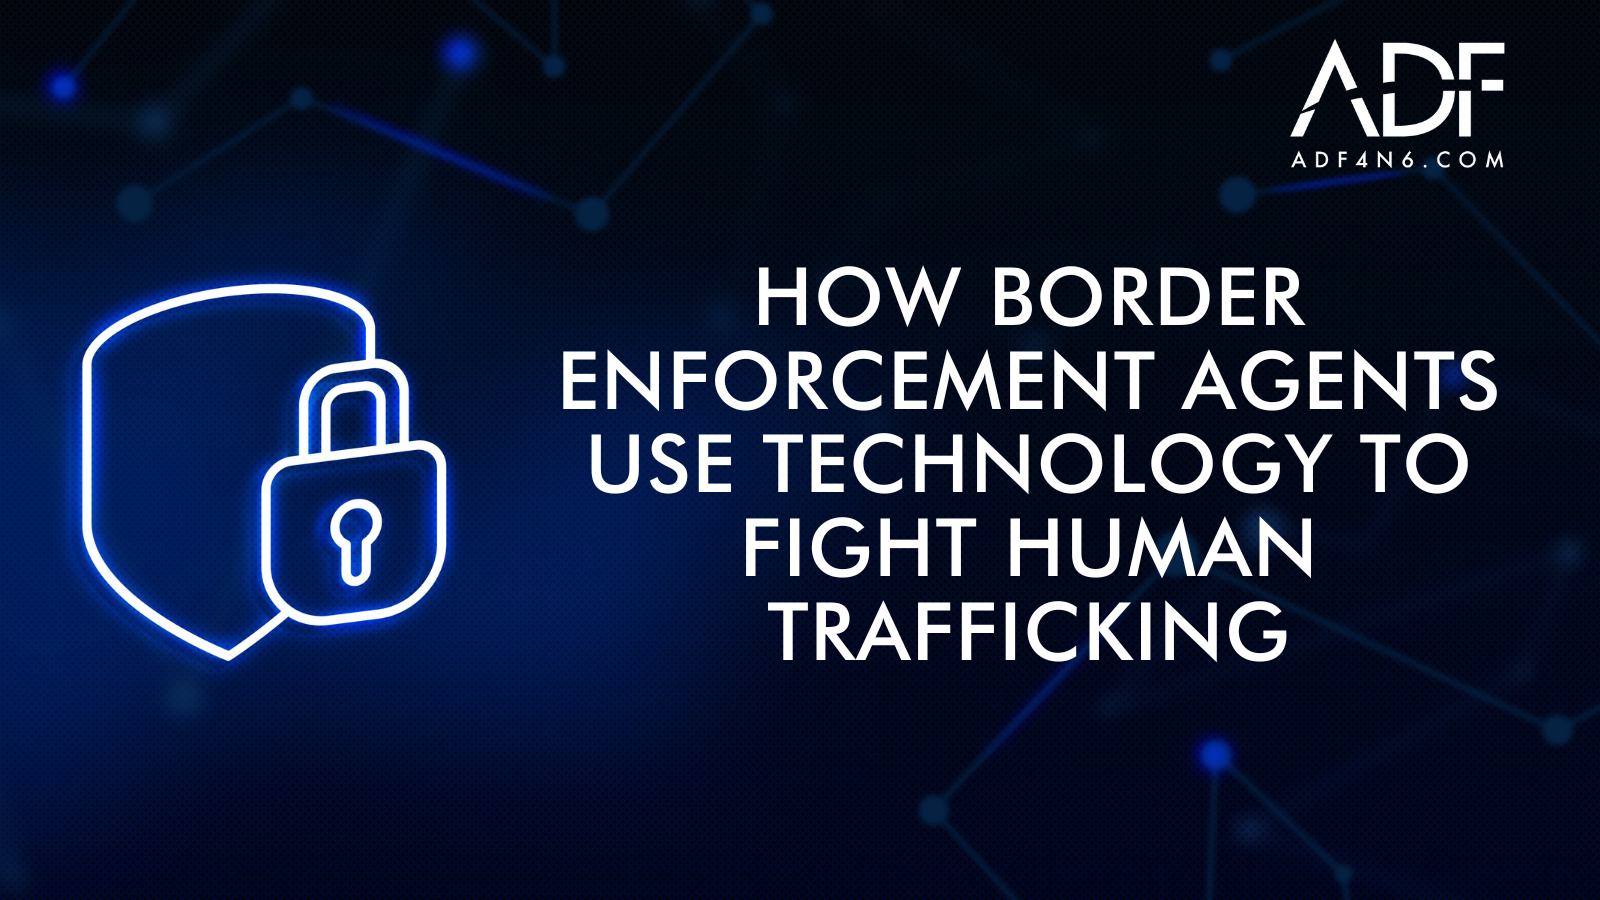 How Border Agents Use Technology to Fight Human Trafficking